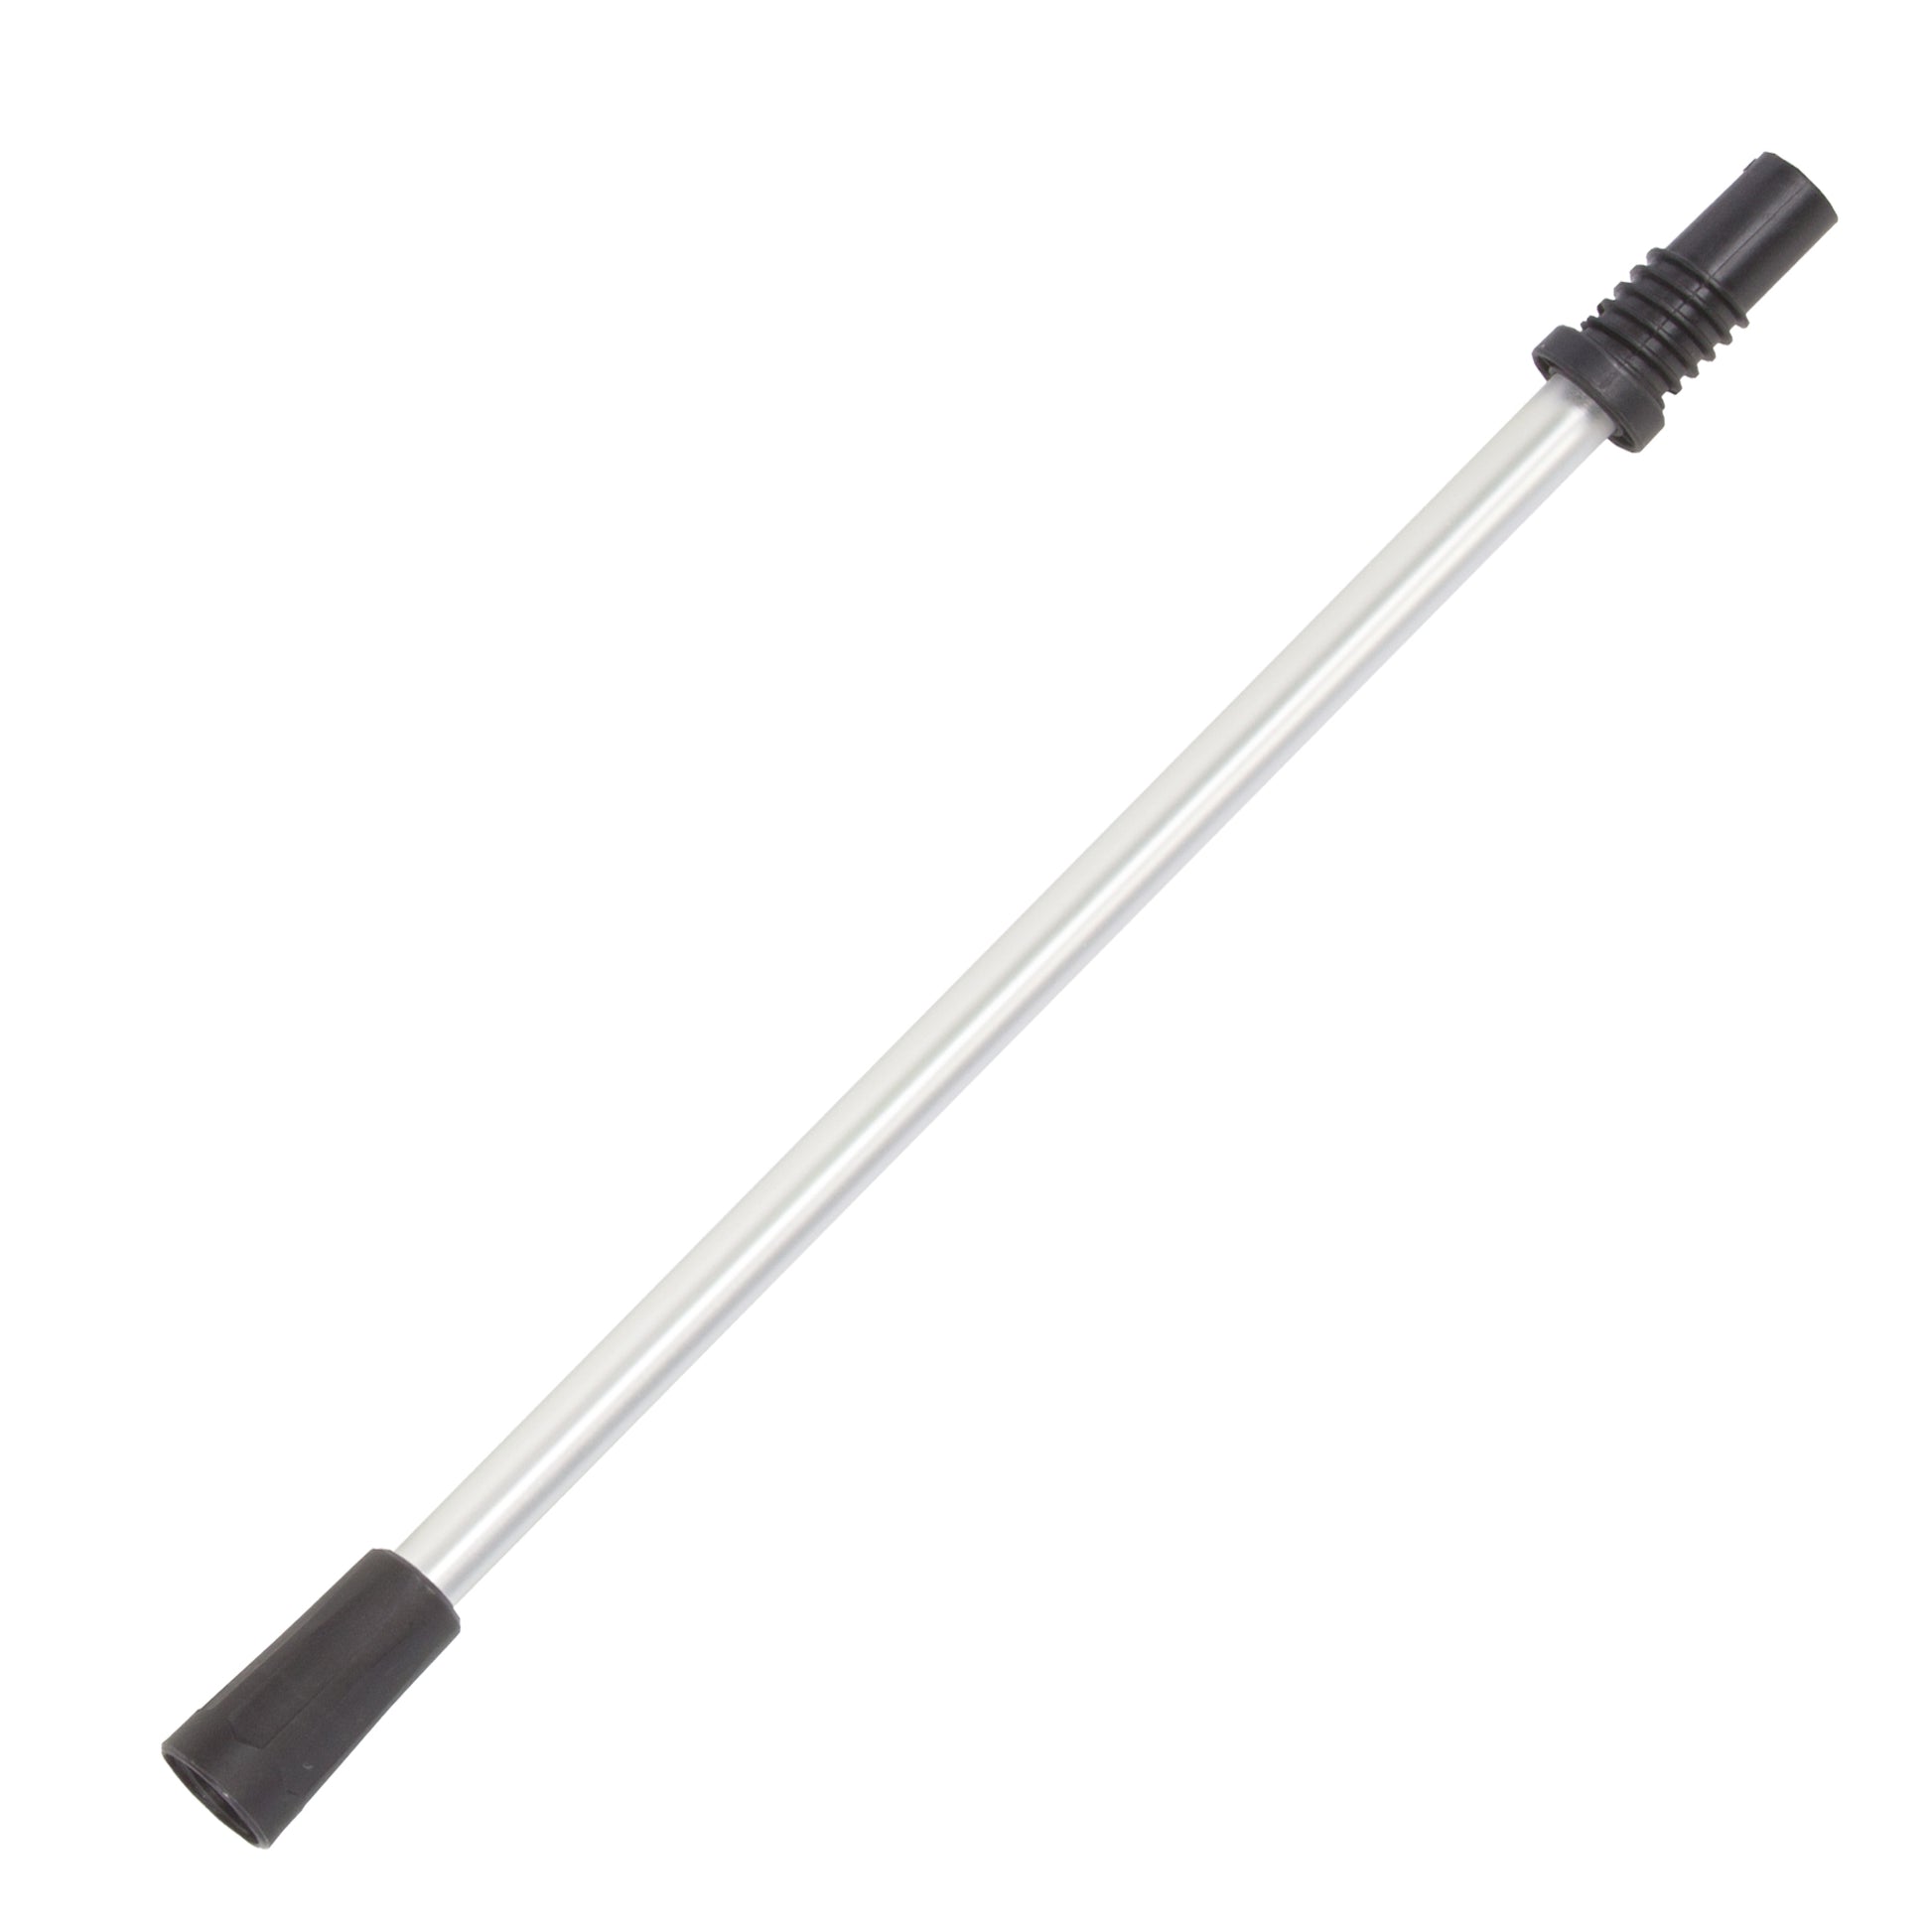 2.6 Foot Extension Pole for Pole Saw / Pole Hedge Trimmer